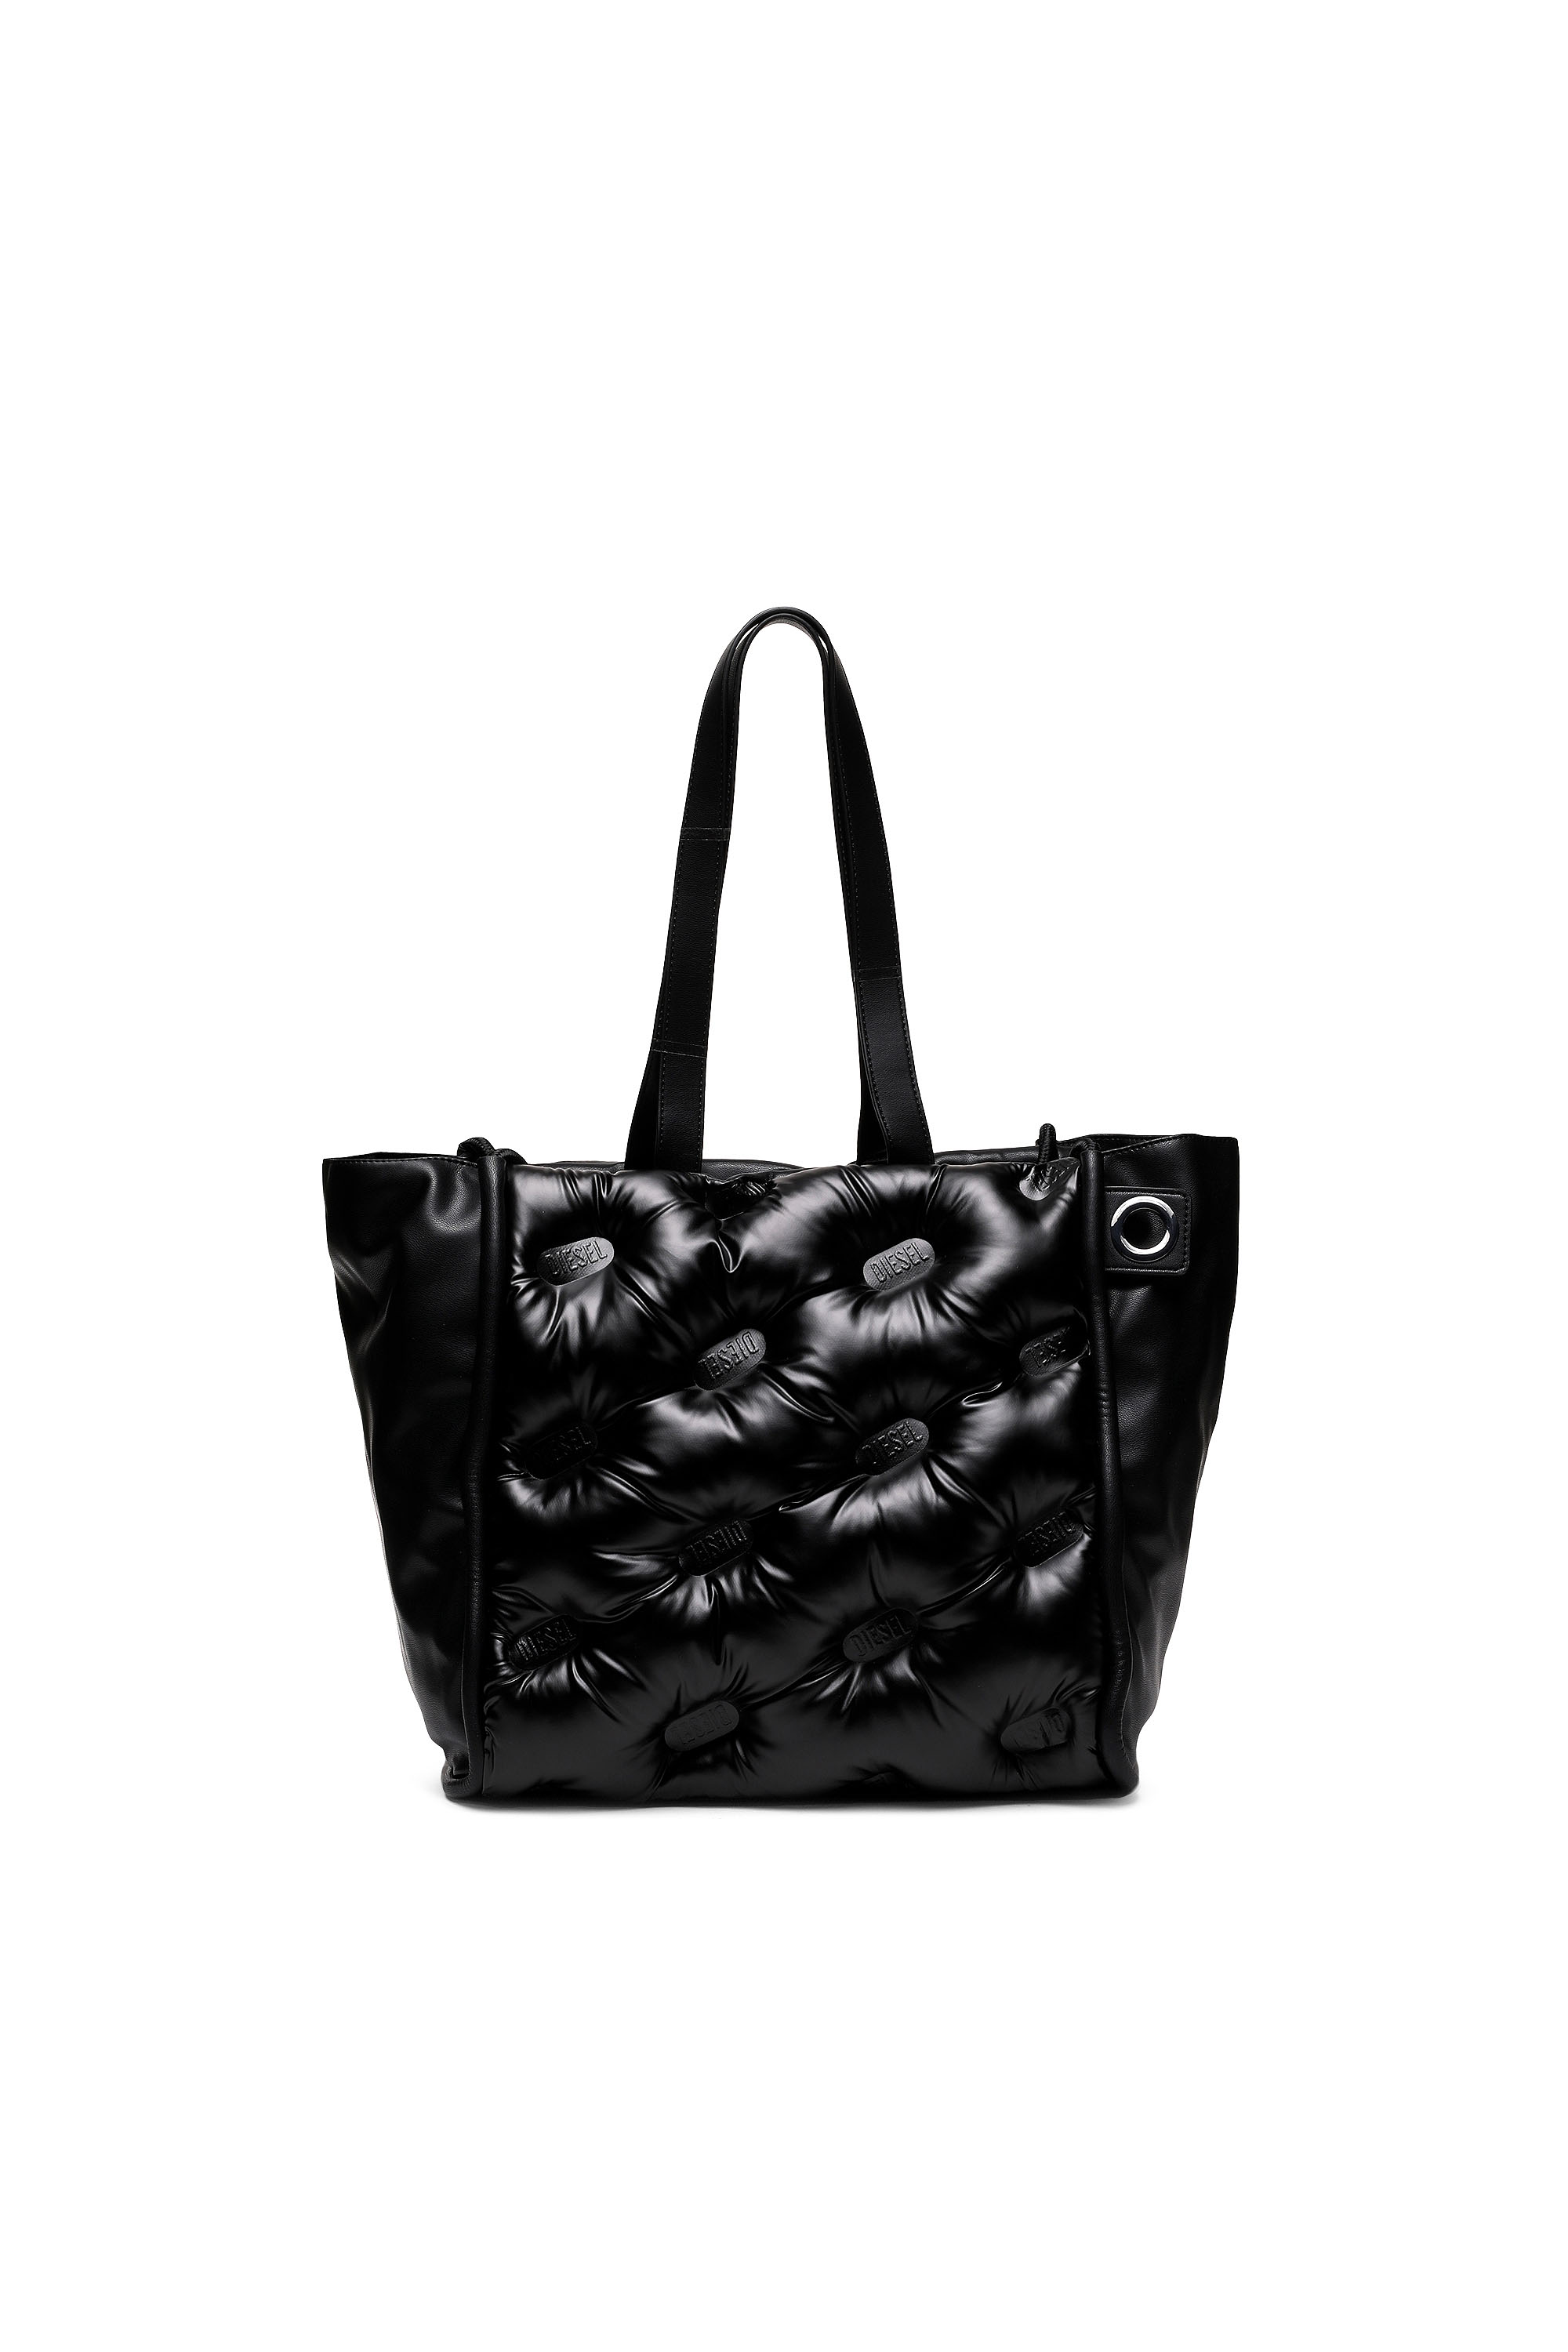 Sale Woman: Bags | Up to 50% Off on Diesel.com